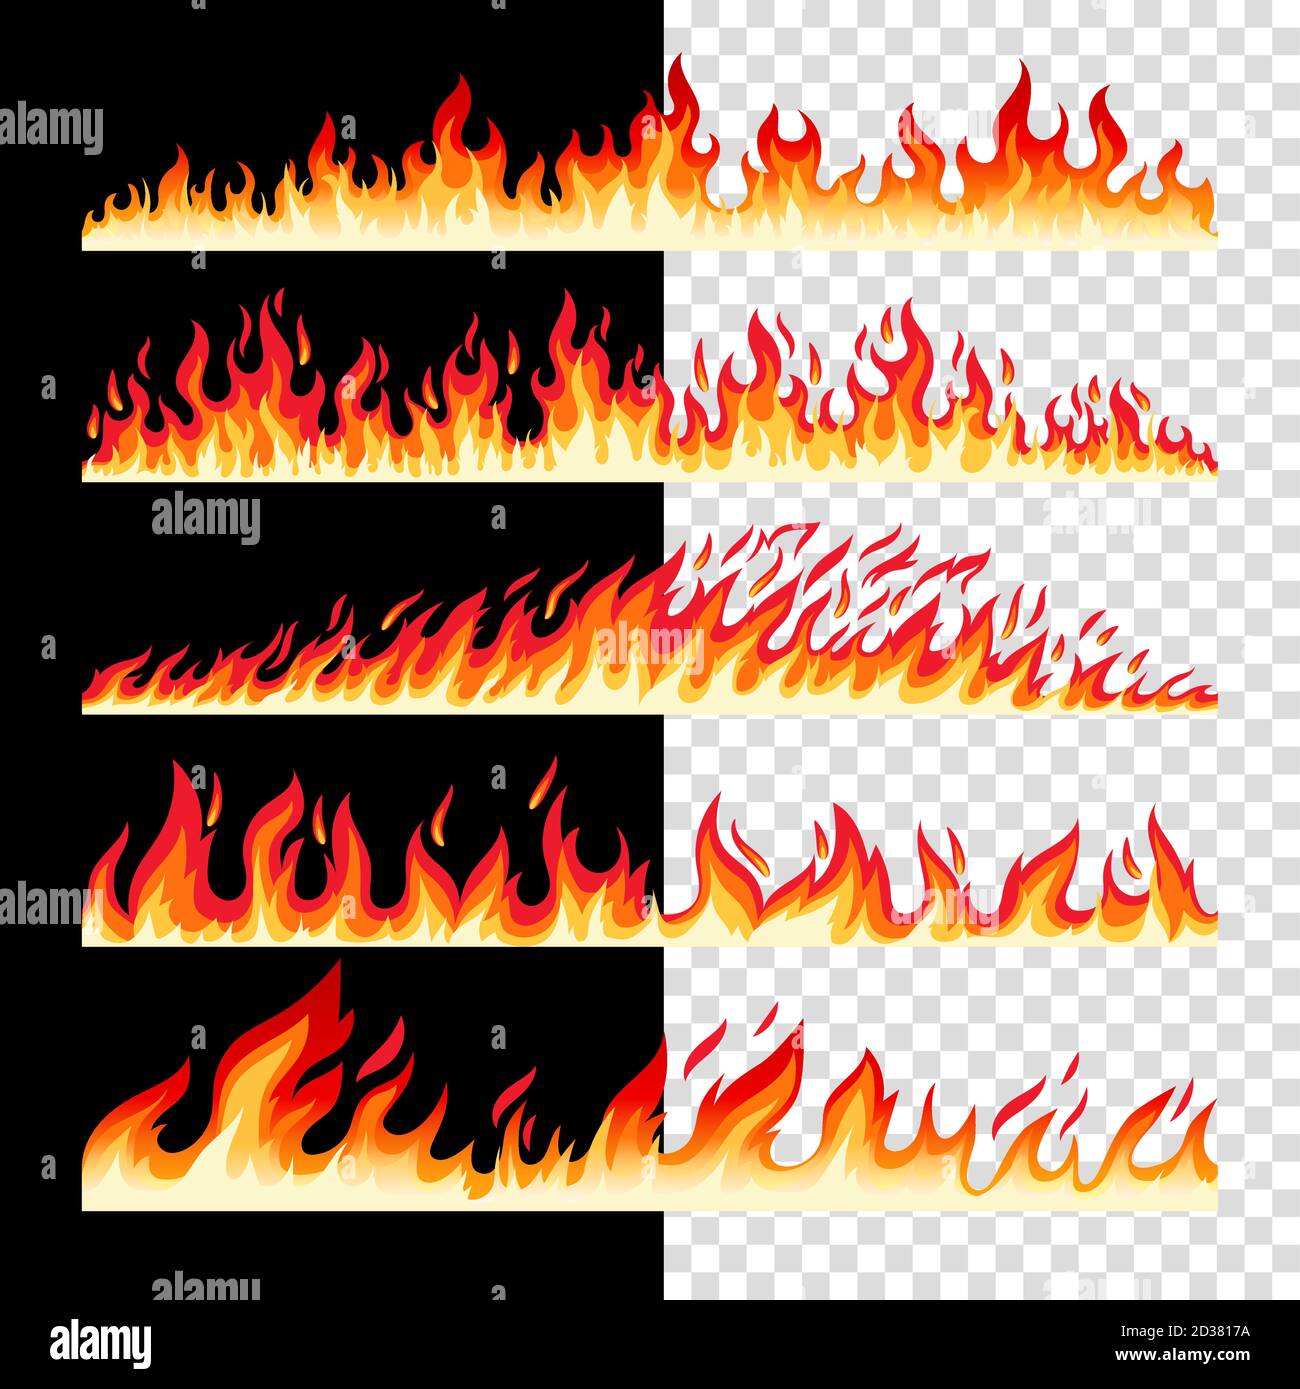 Horizontal seamless fire borders on checkerd and black bacground, vector icons collection Stock Vector